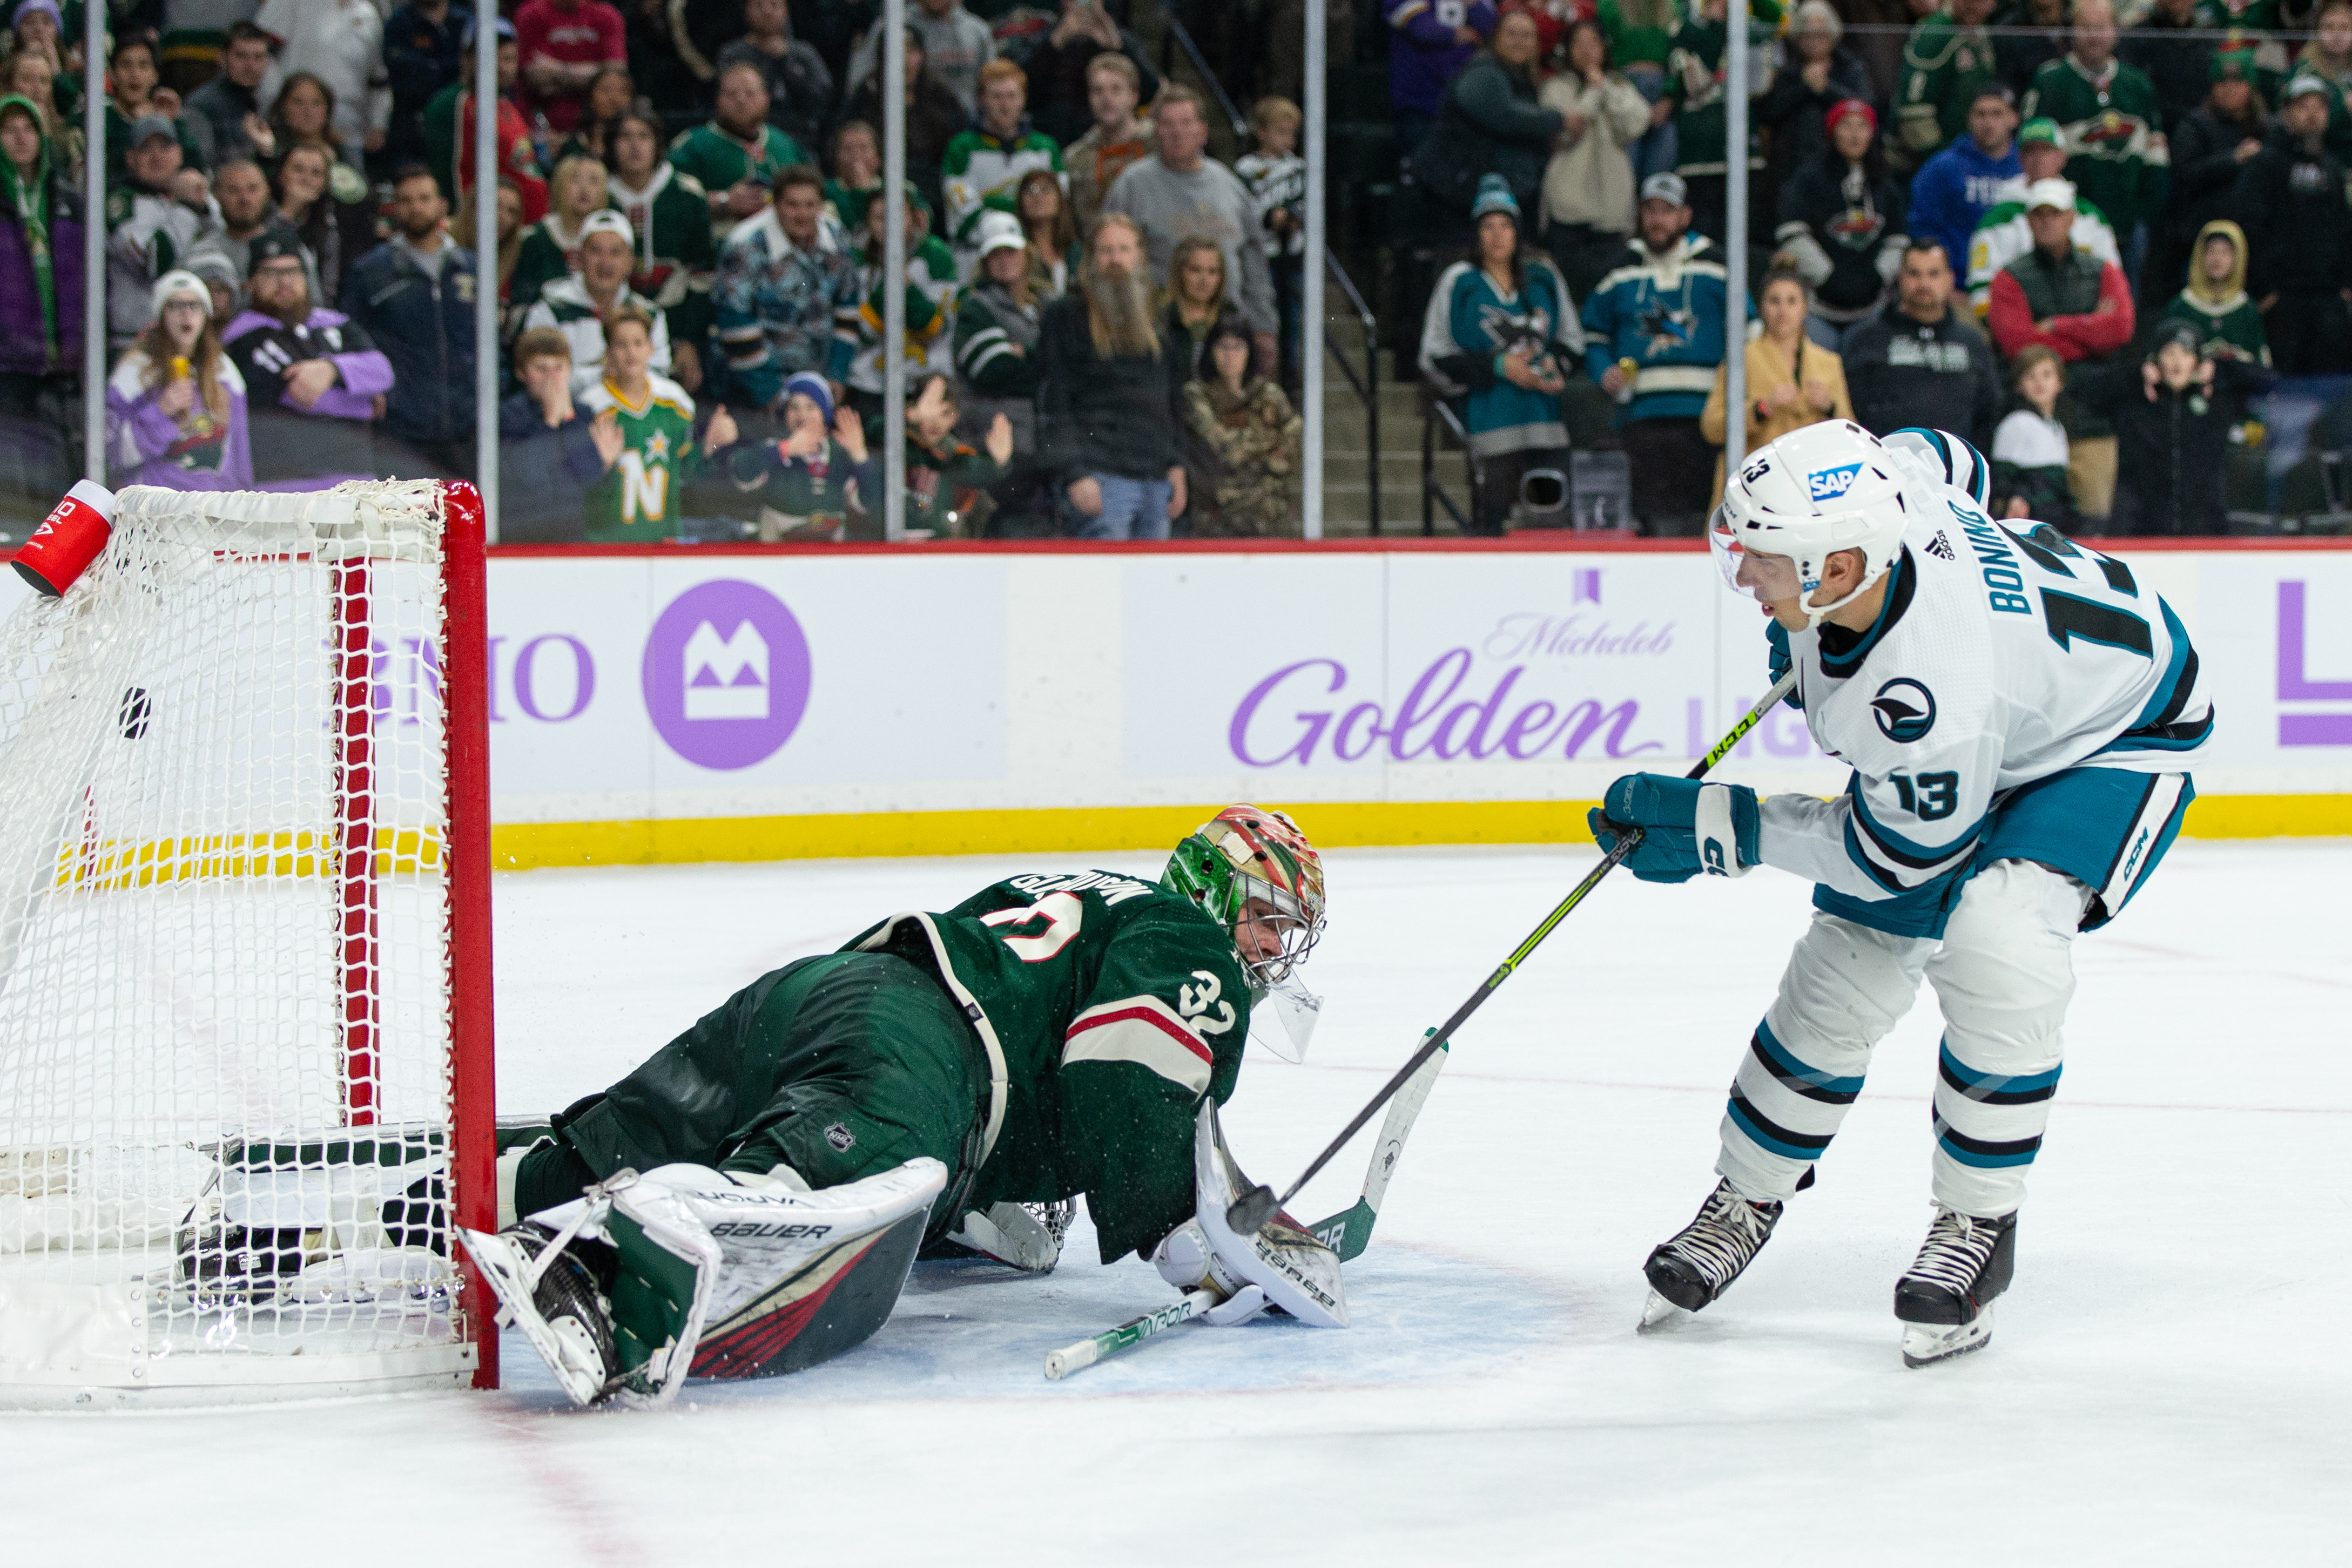 San Jose Sharks center Nick Bonino (13) scores a goal in the shootout on Minnesota Wild goaltender Filip Gustavsson (32) during the NHL game between the San Jose Sharks and the Minnesota Wild, on November 13th, 2022, at Xcel Energy Center in Saint Paul, MN.